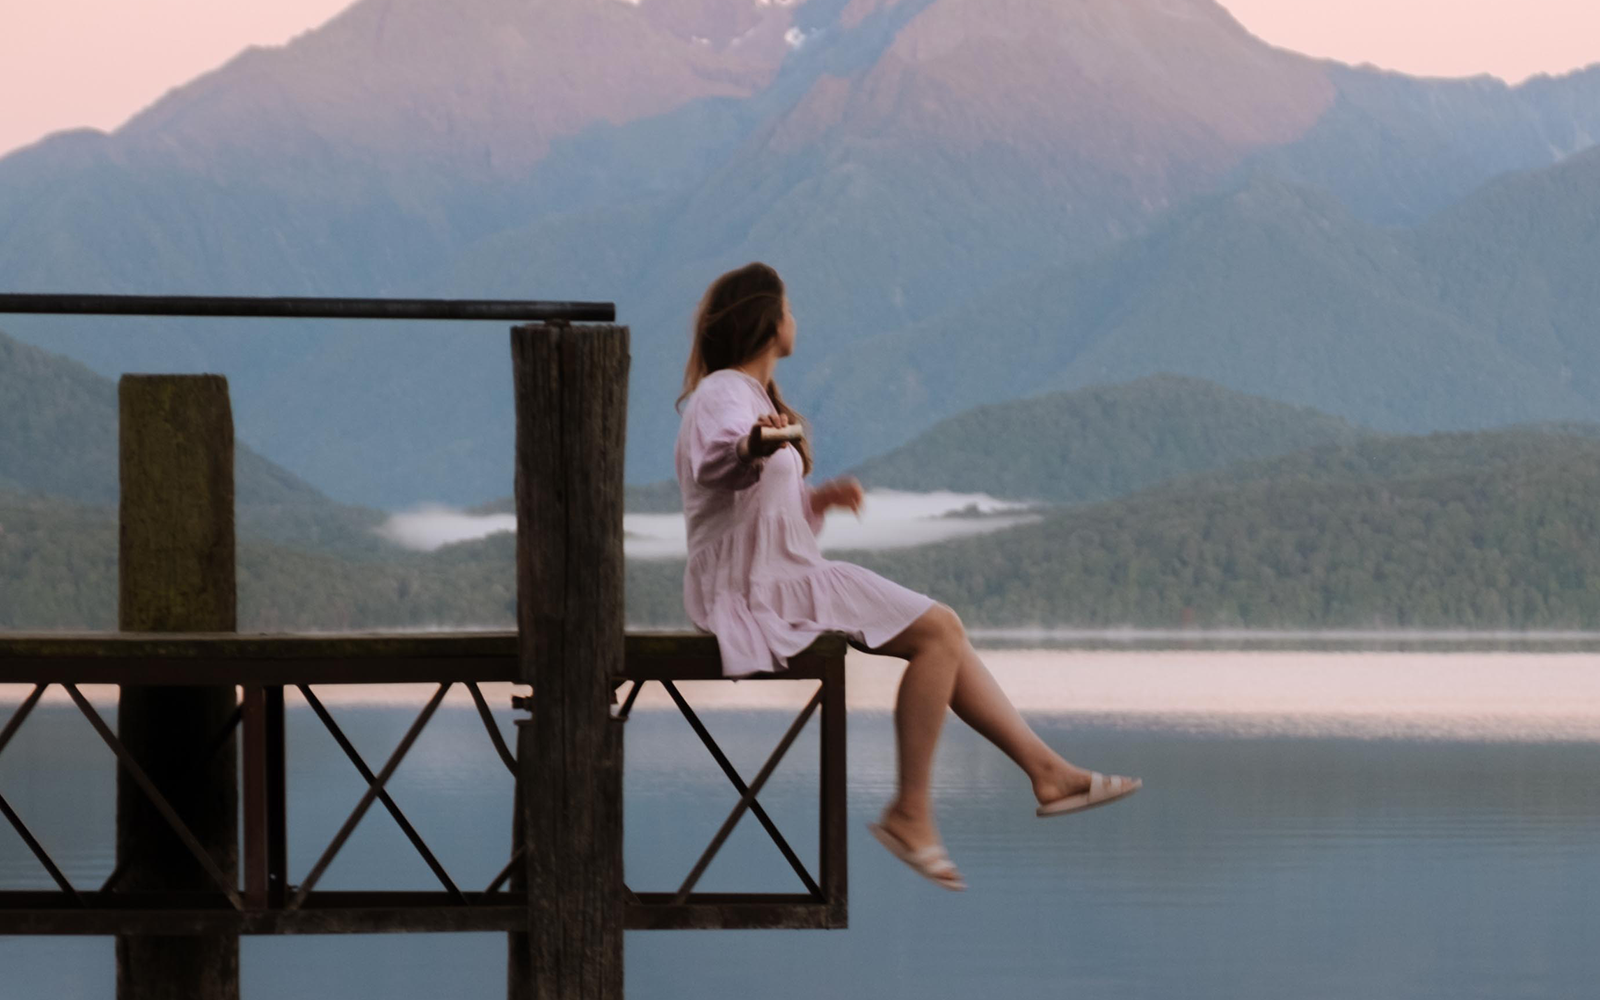 Woman exploring New Zealand with Everkind Organic Deodorant. Award-winning deodorant for people who don't want to choose between wellbeing and what works.